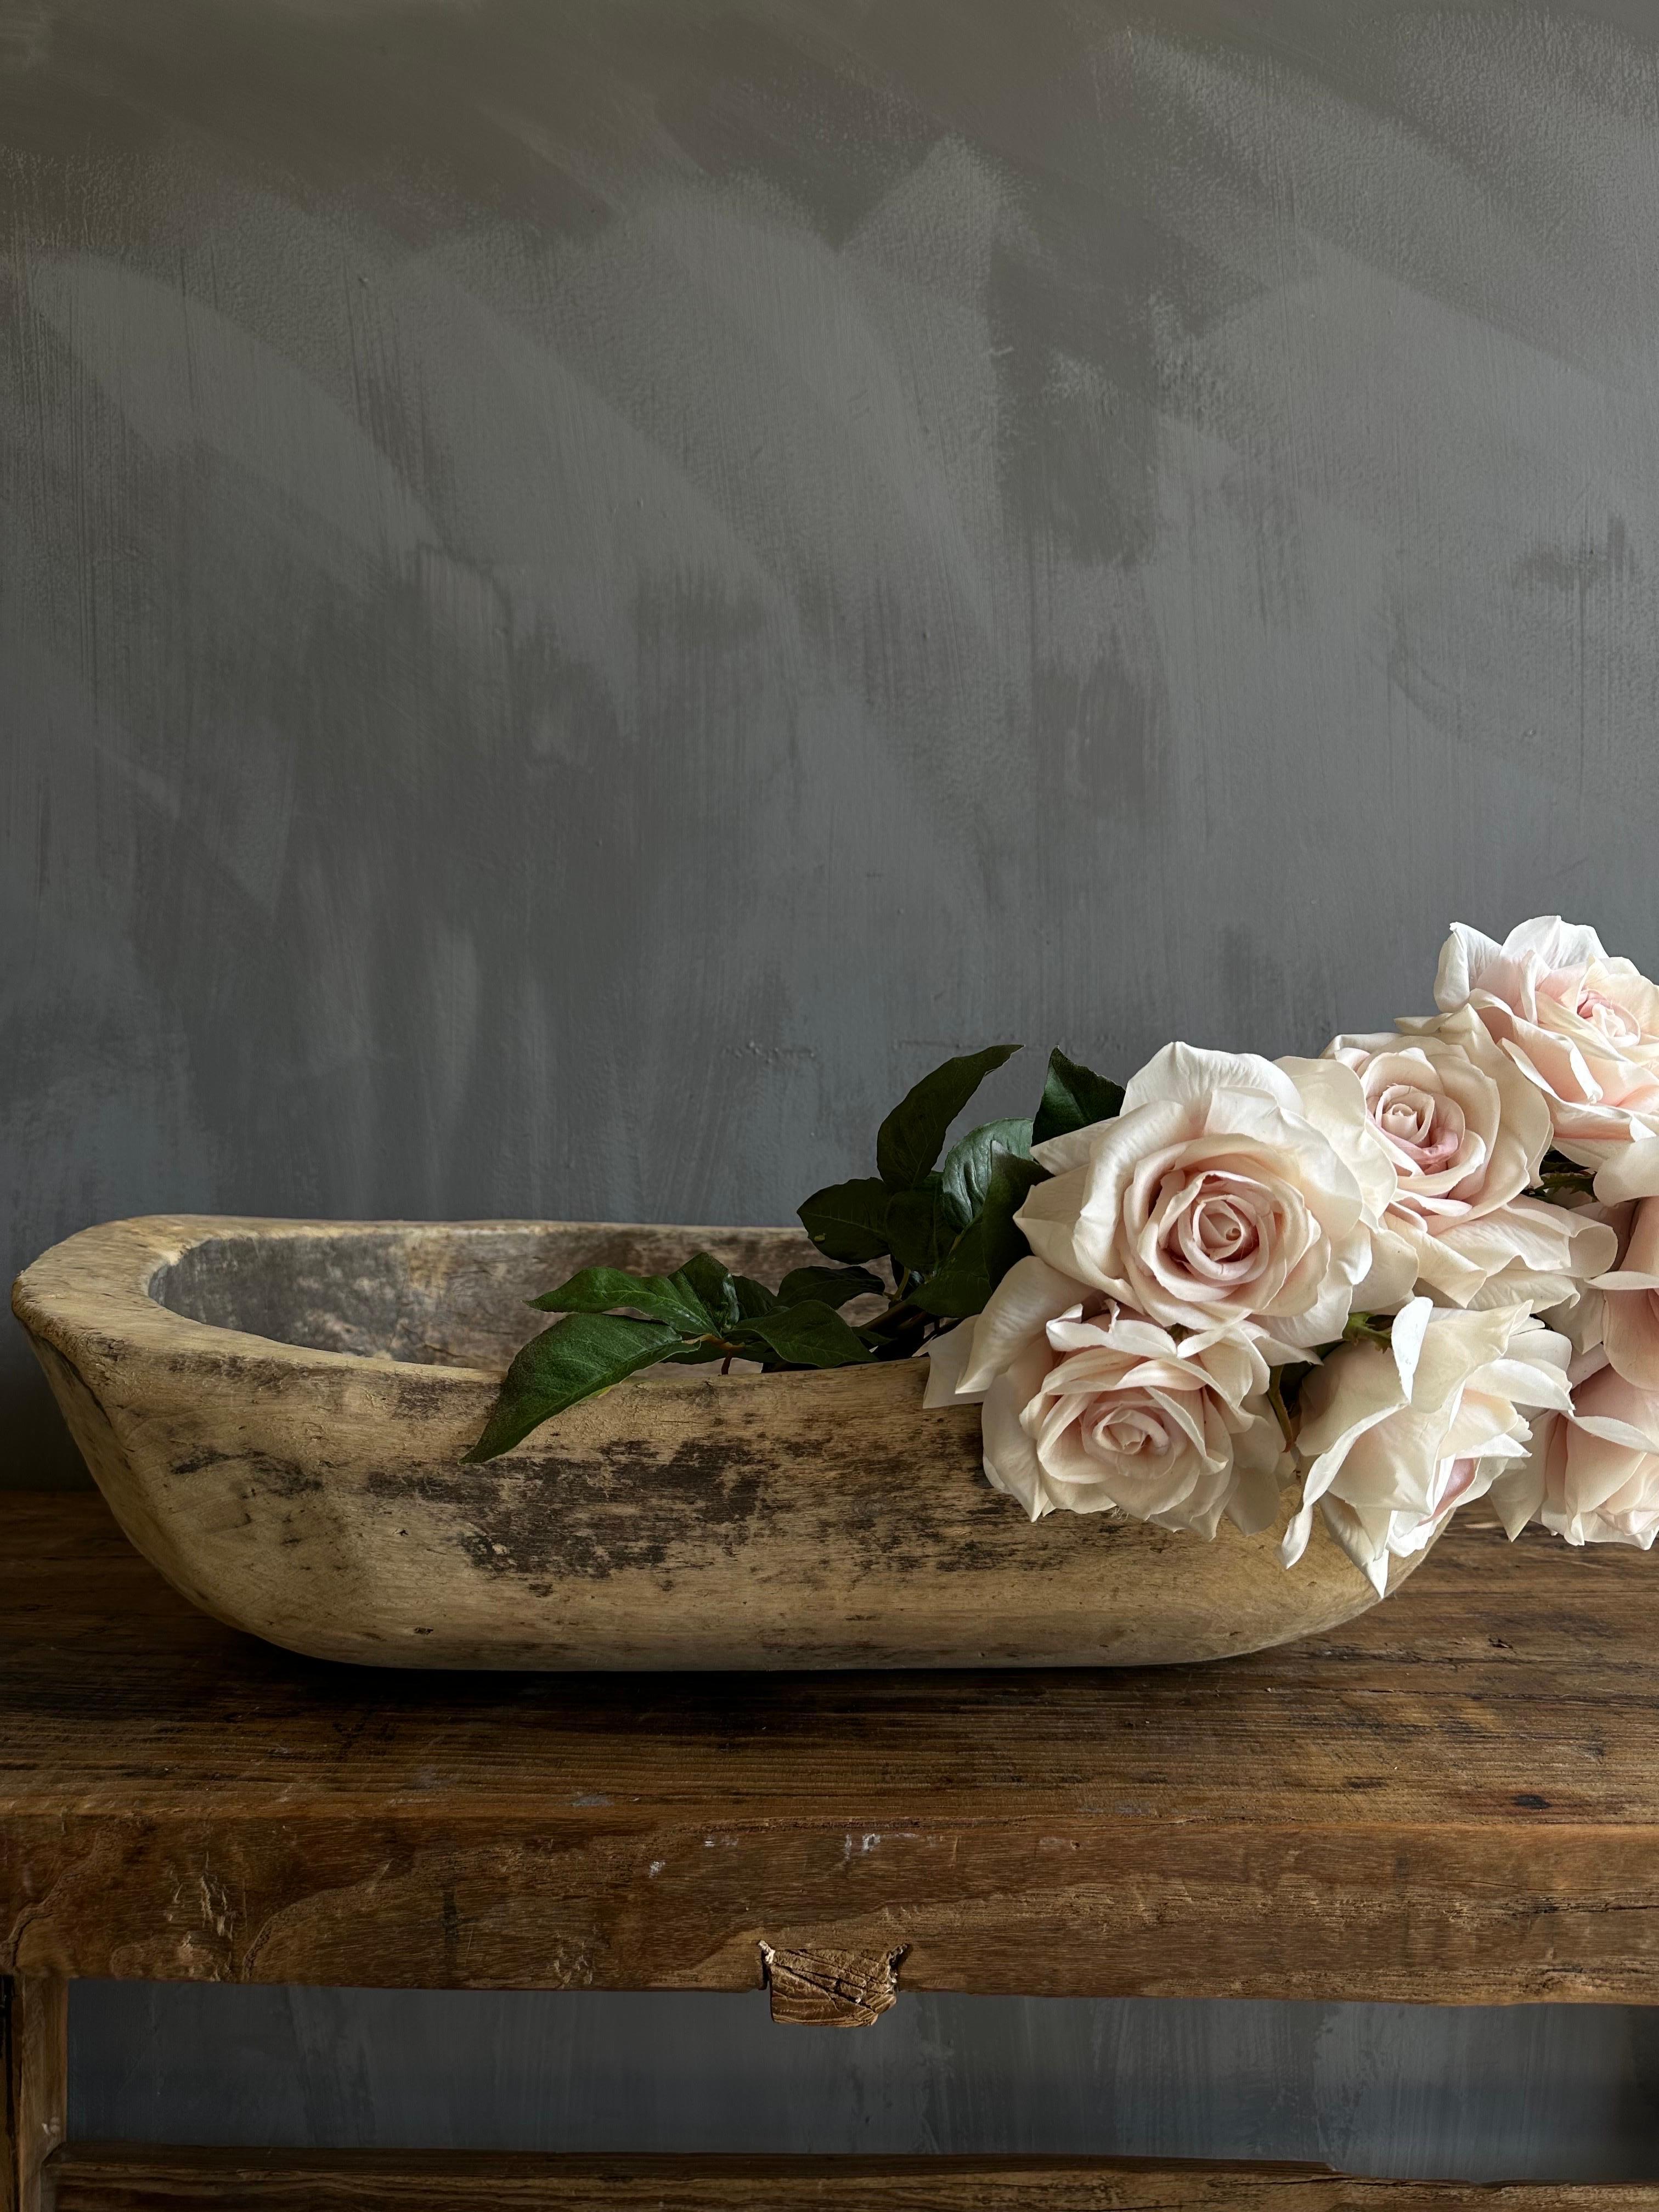 Vintage Wood Trough Decorative Bowl
A beautiful wood trough with a natural patina. Can be used on a dining table or server for decoration.
Wood is natural with patina. Some troughs will have decorative metal on or around the bowl, please view the